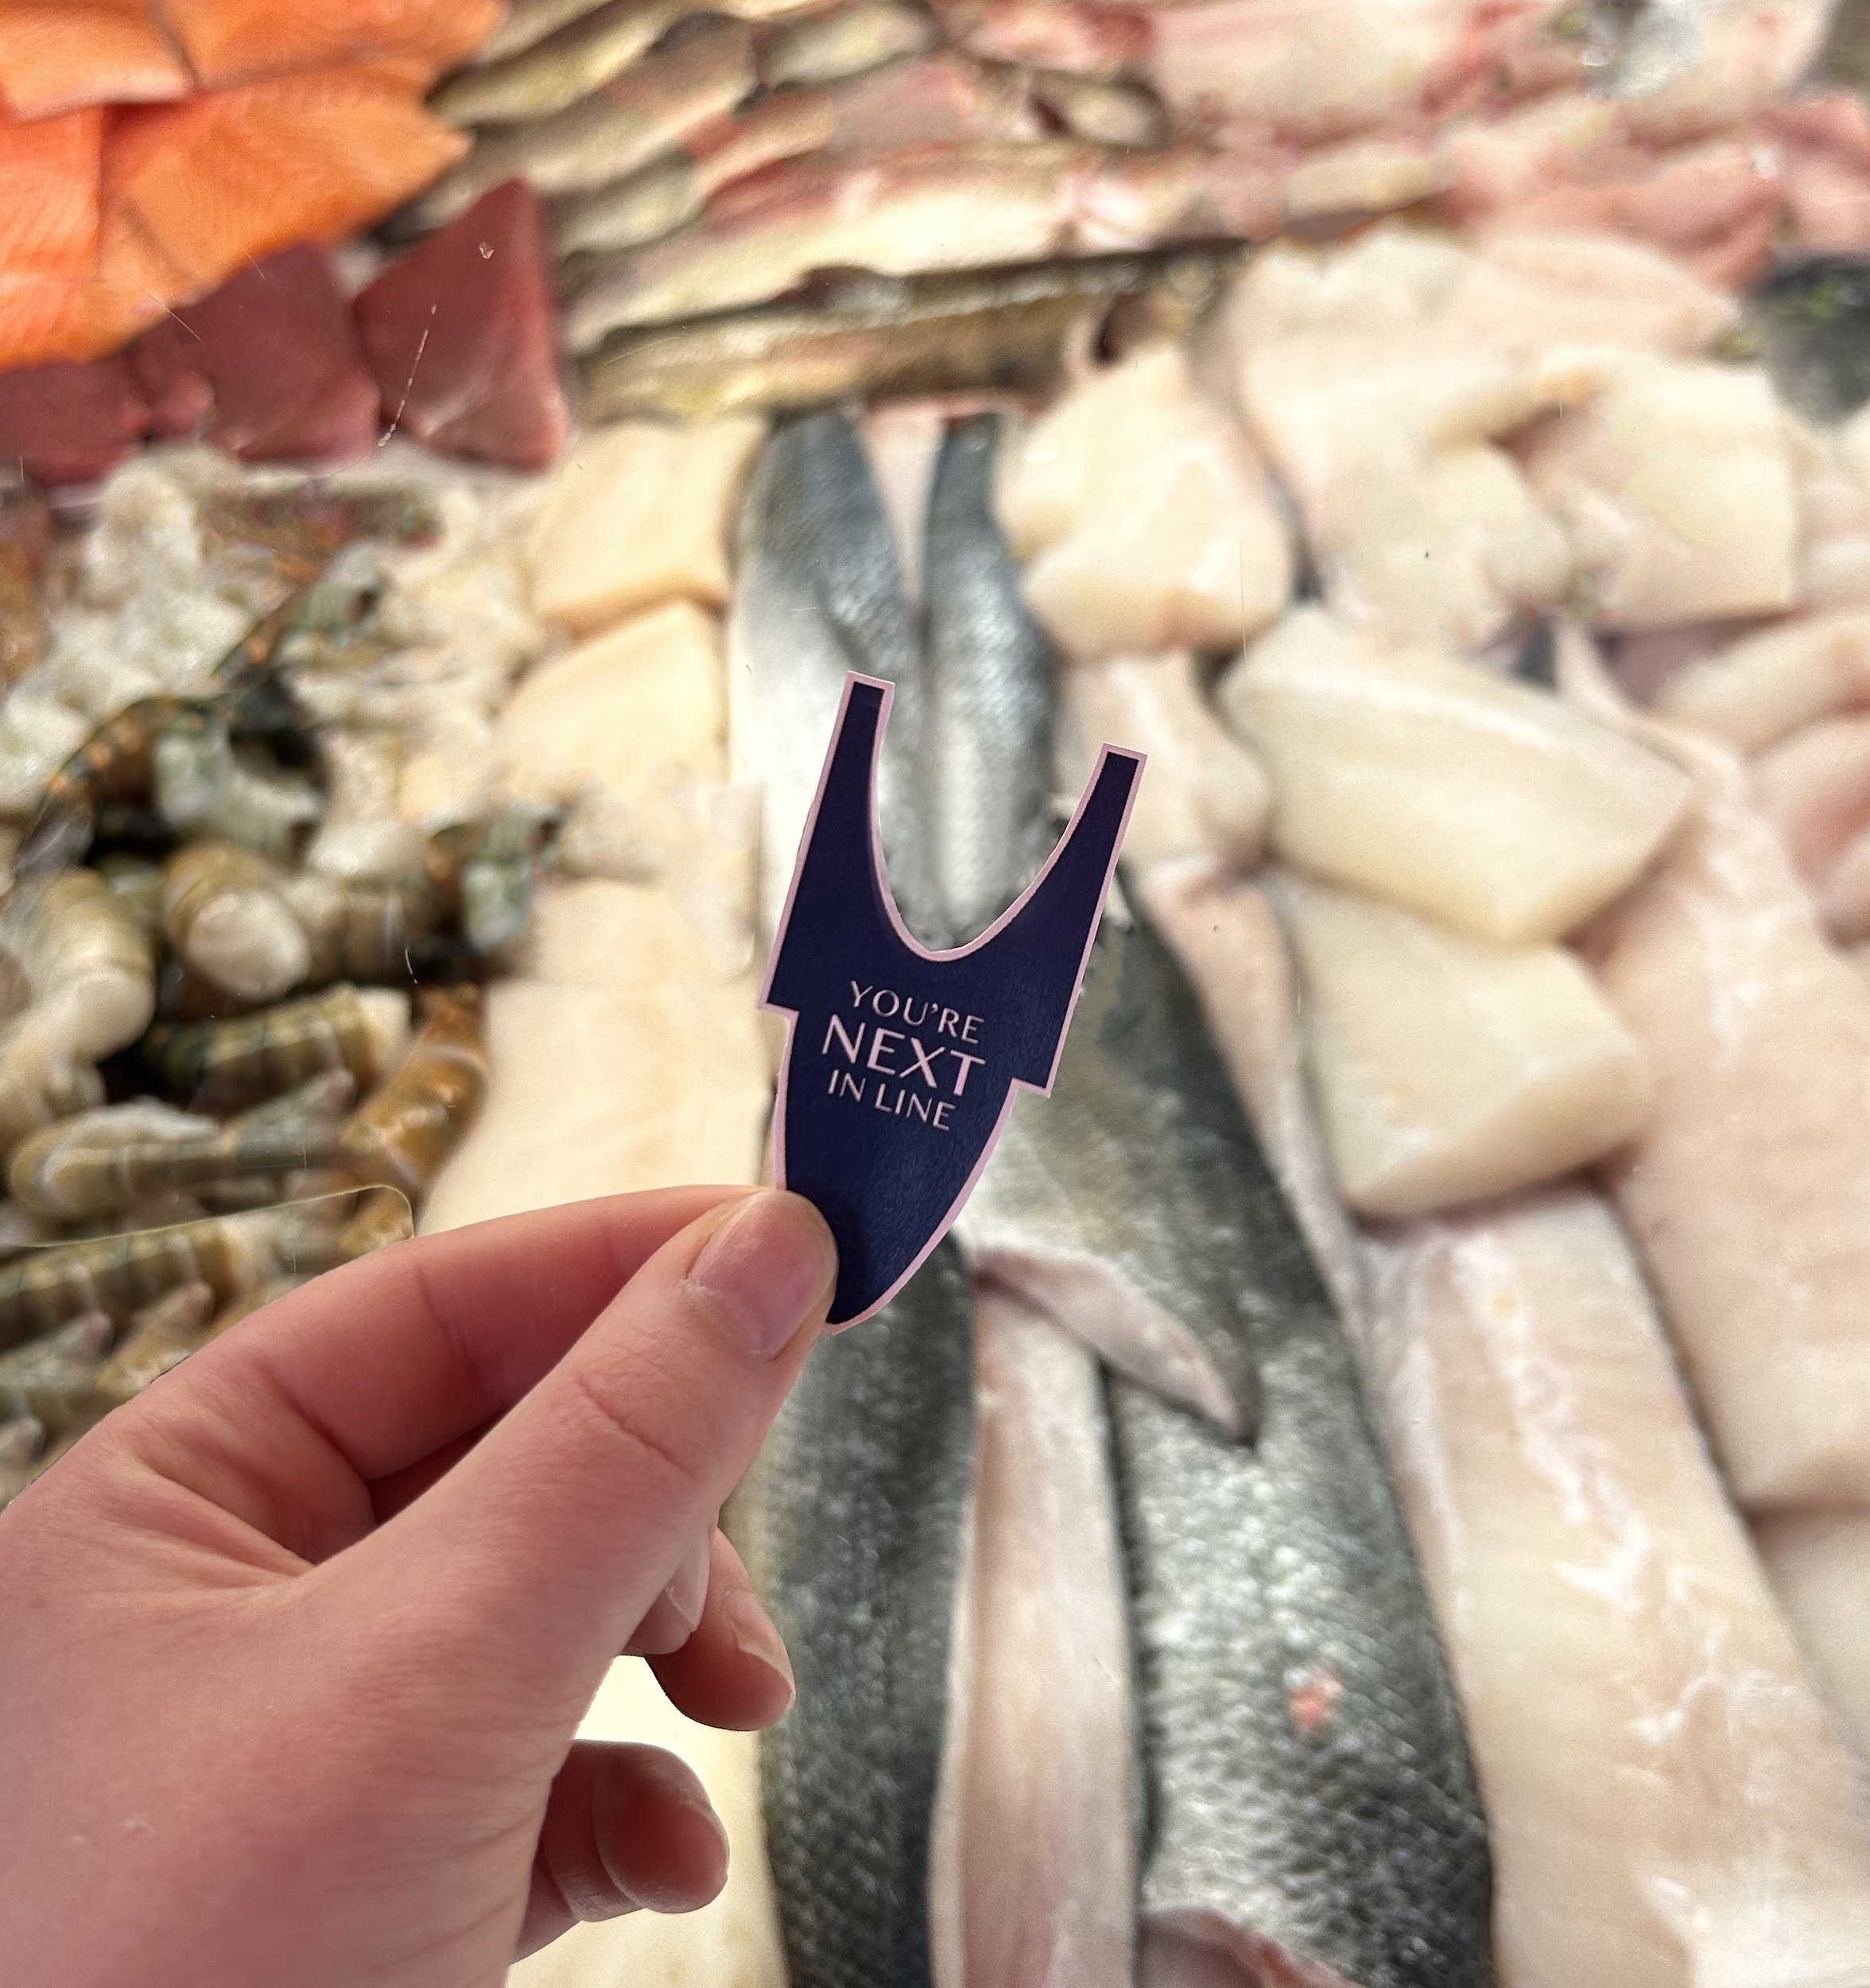 A blue queuing ticket that says 'next in line', surrounded by fish in a fishmongers.